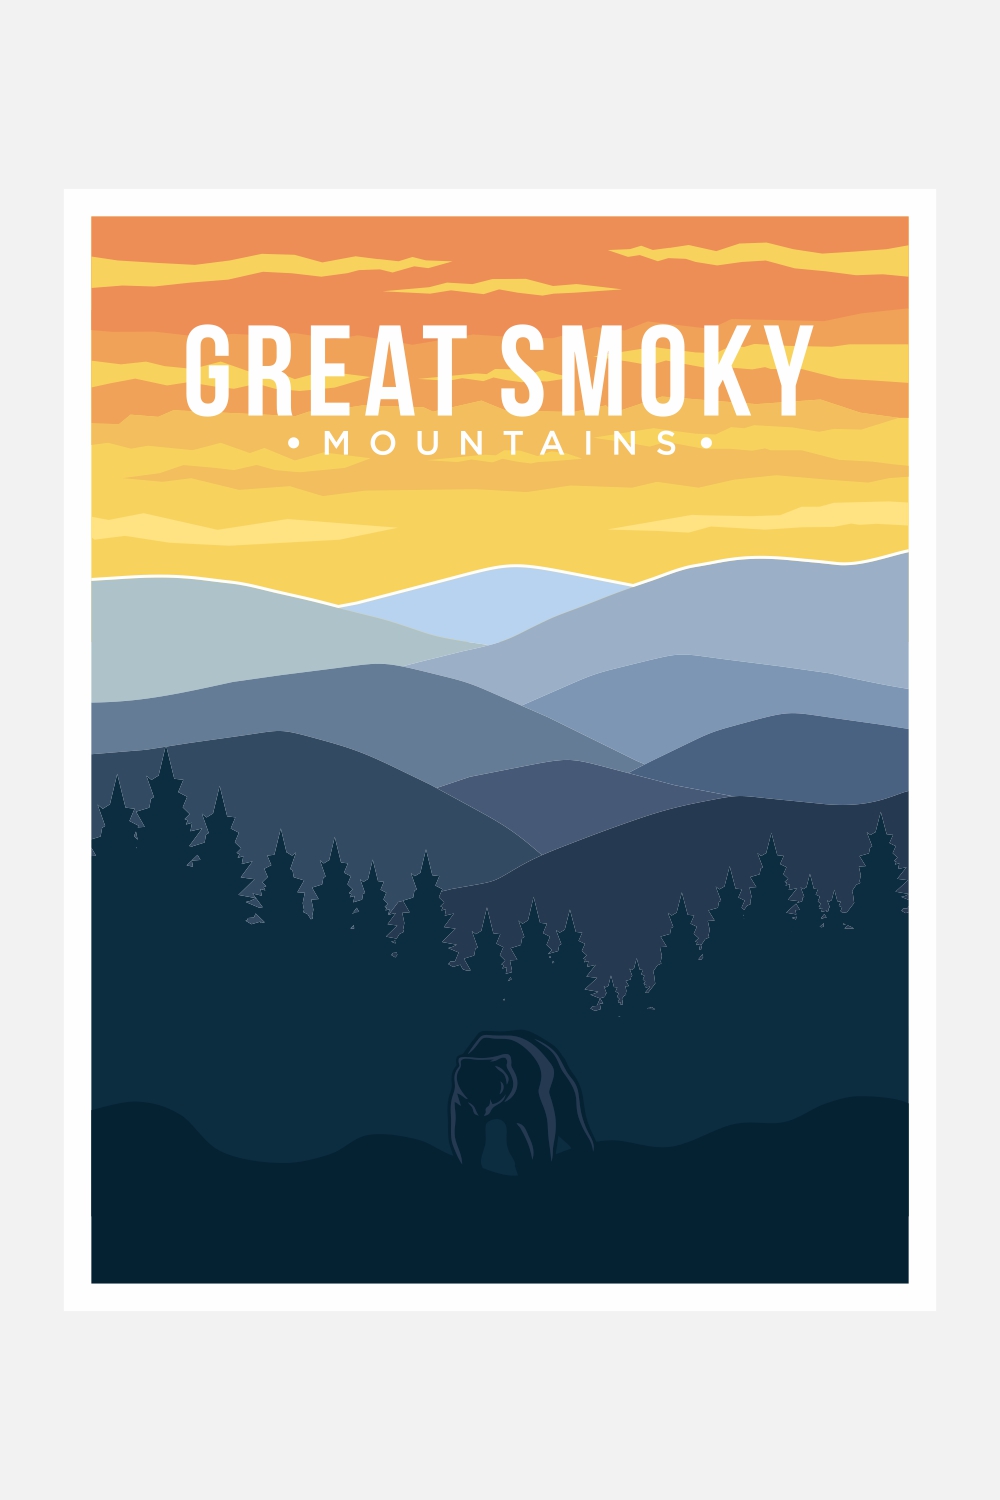 Great Smoky national park poster vector illustration design – Only $8 pinterest preview image.